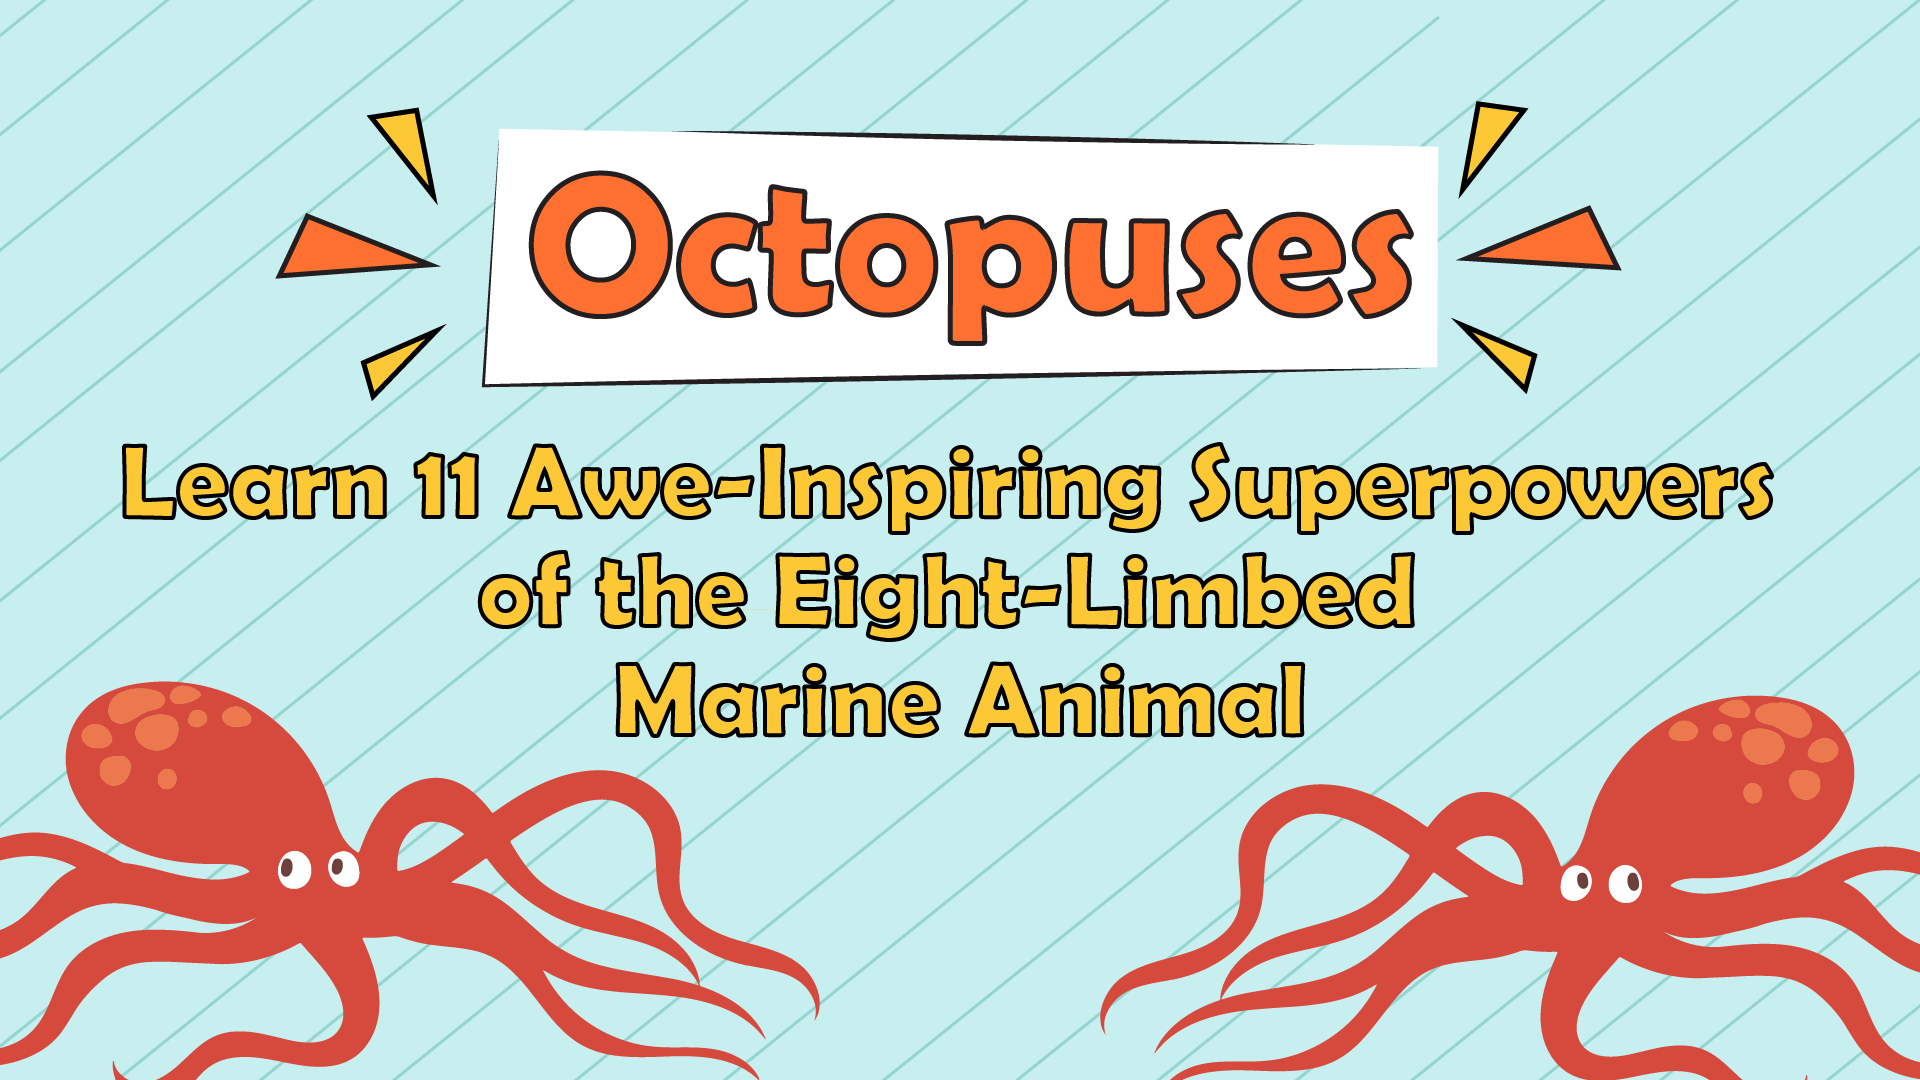 Octopuses: Learn 11 Awe-Inspiring Superpowers of the Eight-Limbed Marine Animal – Part 1